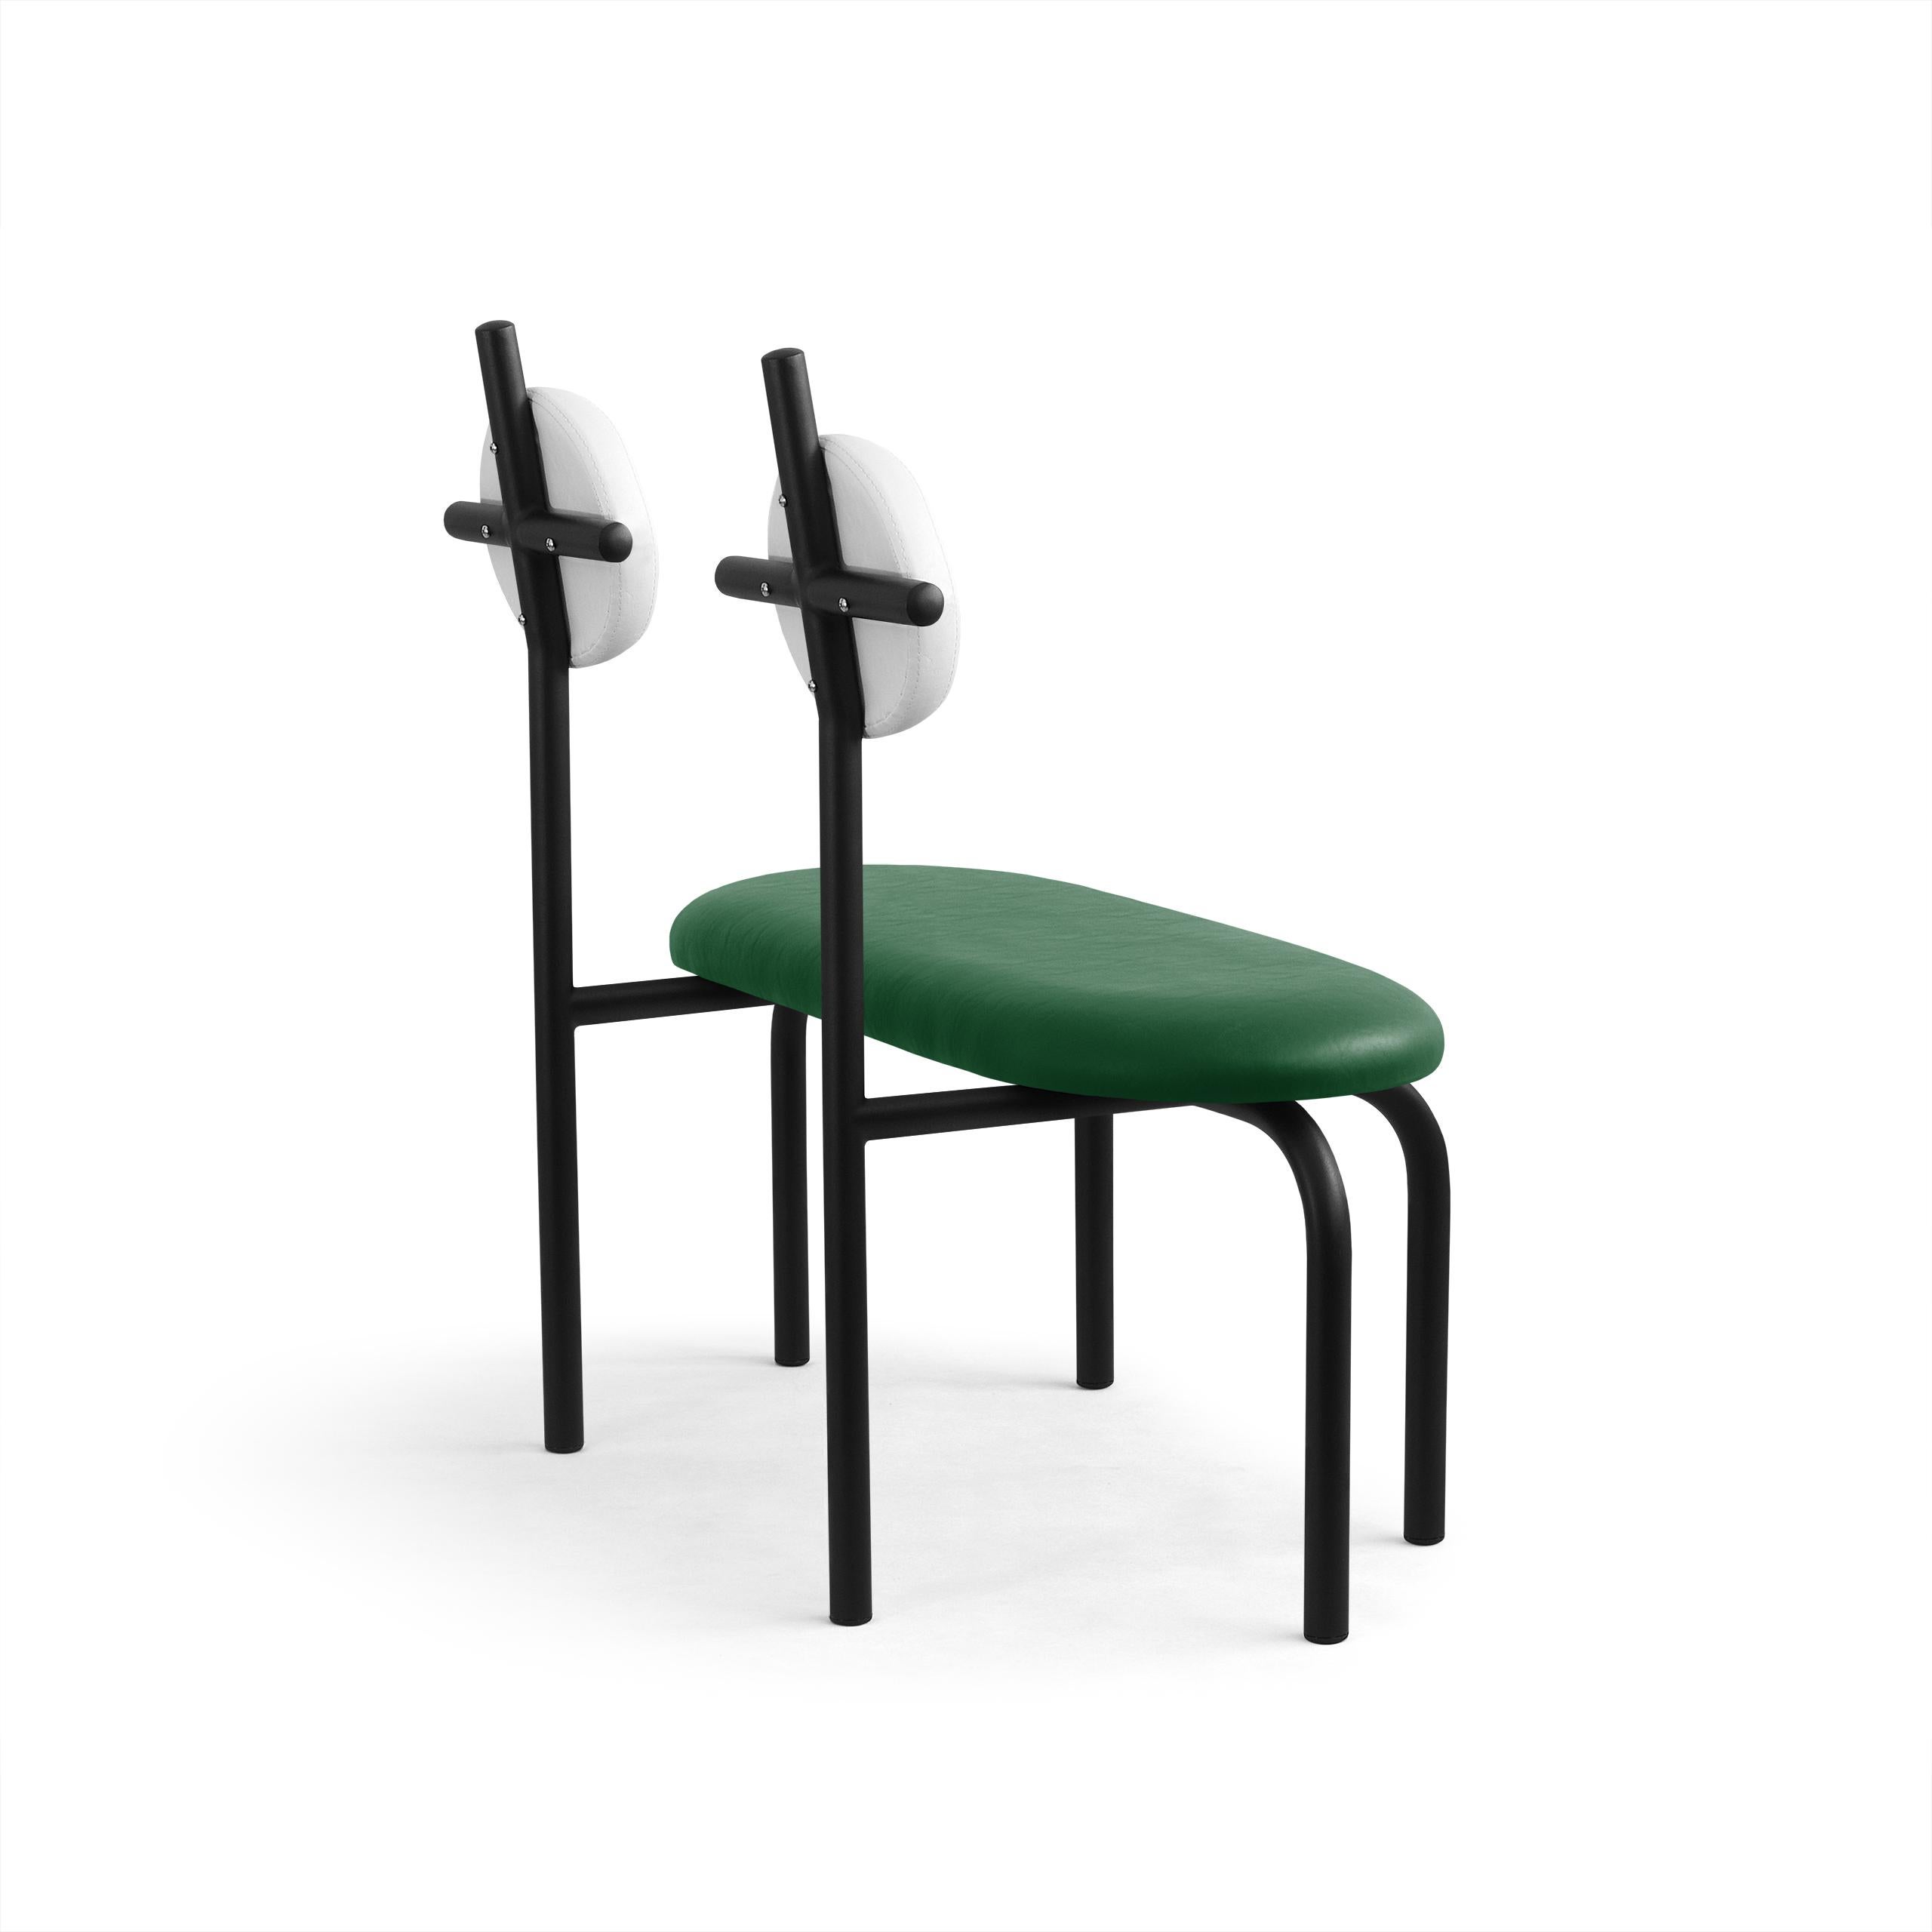 Appliqué PK17 Impermeable Loveseat, Green Seat & Black Metal Structure by Paulo Kobylka For Sale